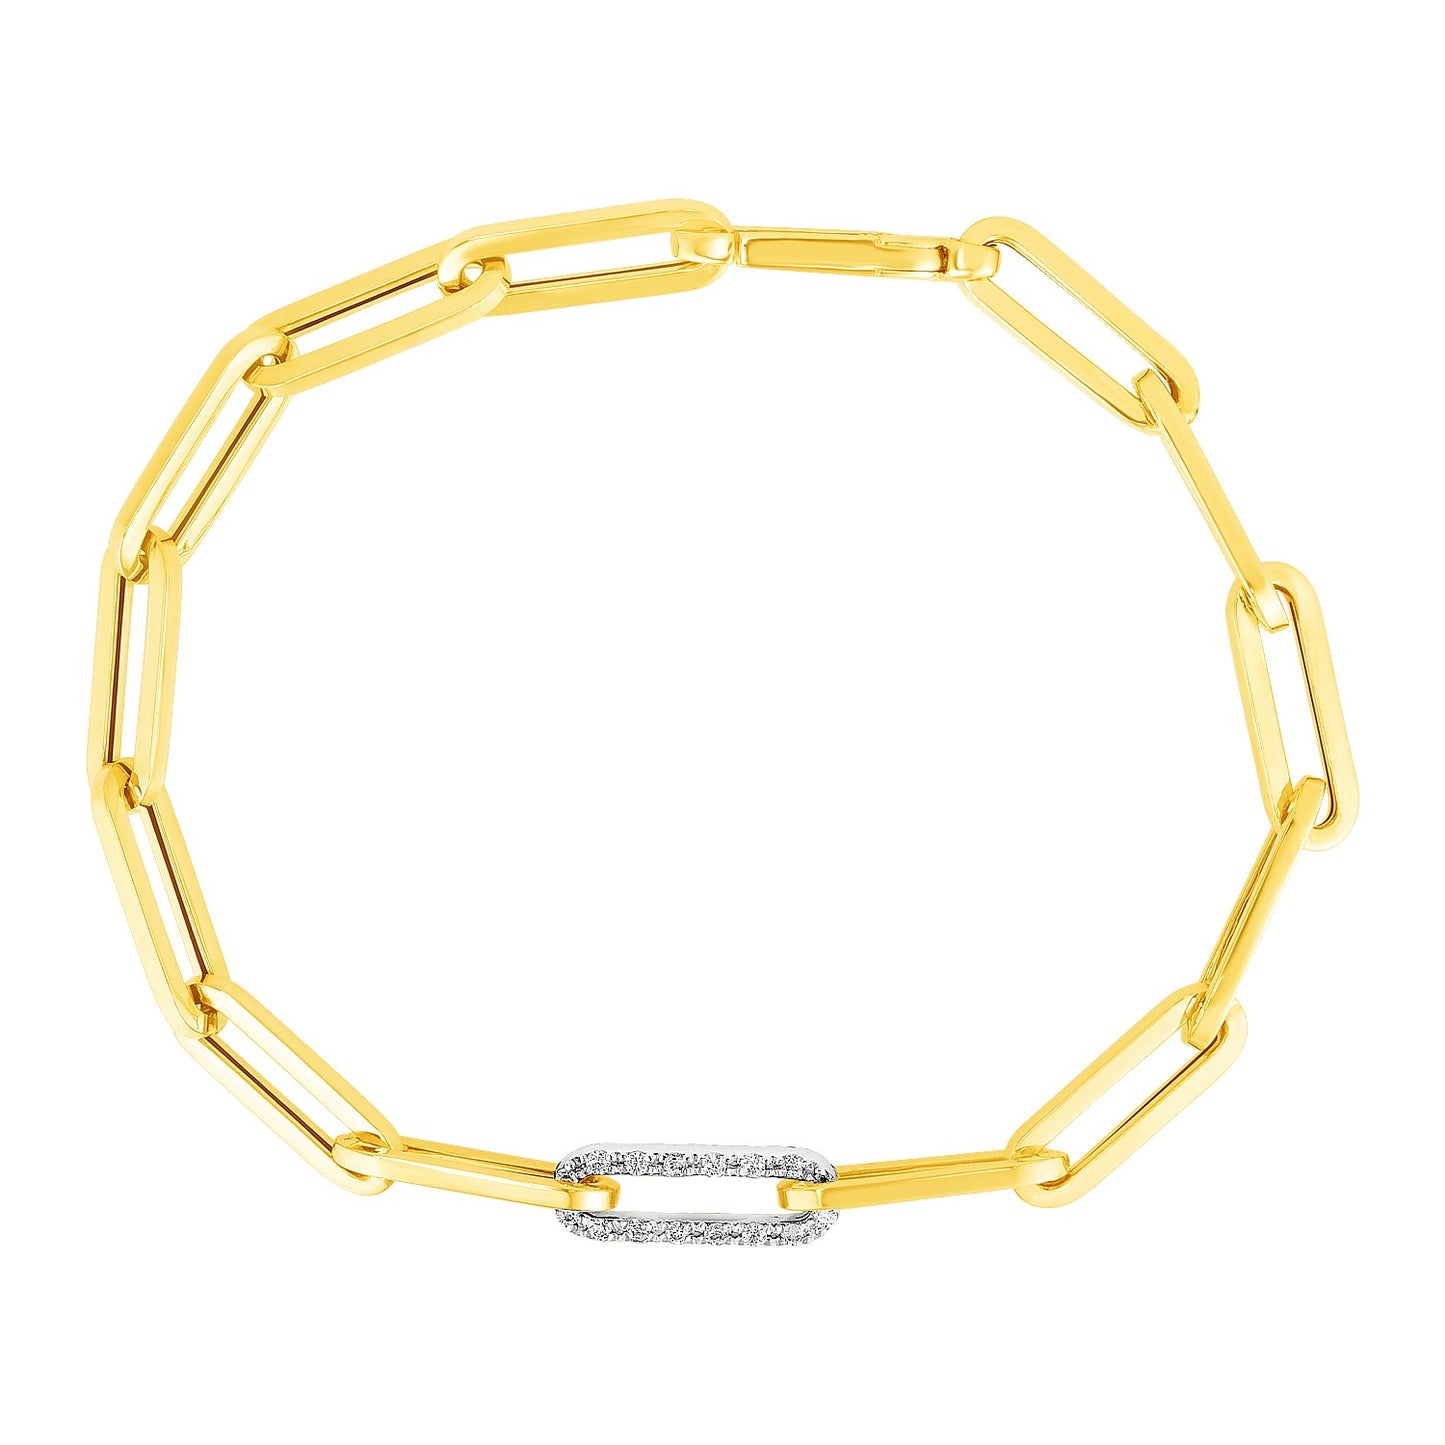 14k Yellow Gold Paperclip Chain Bracelet with Diamond Link